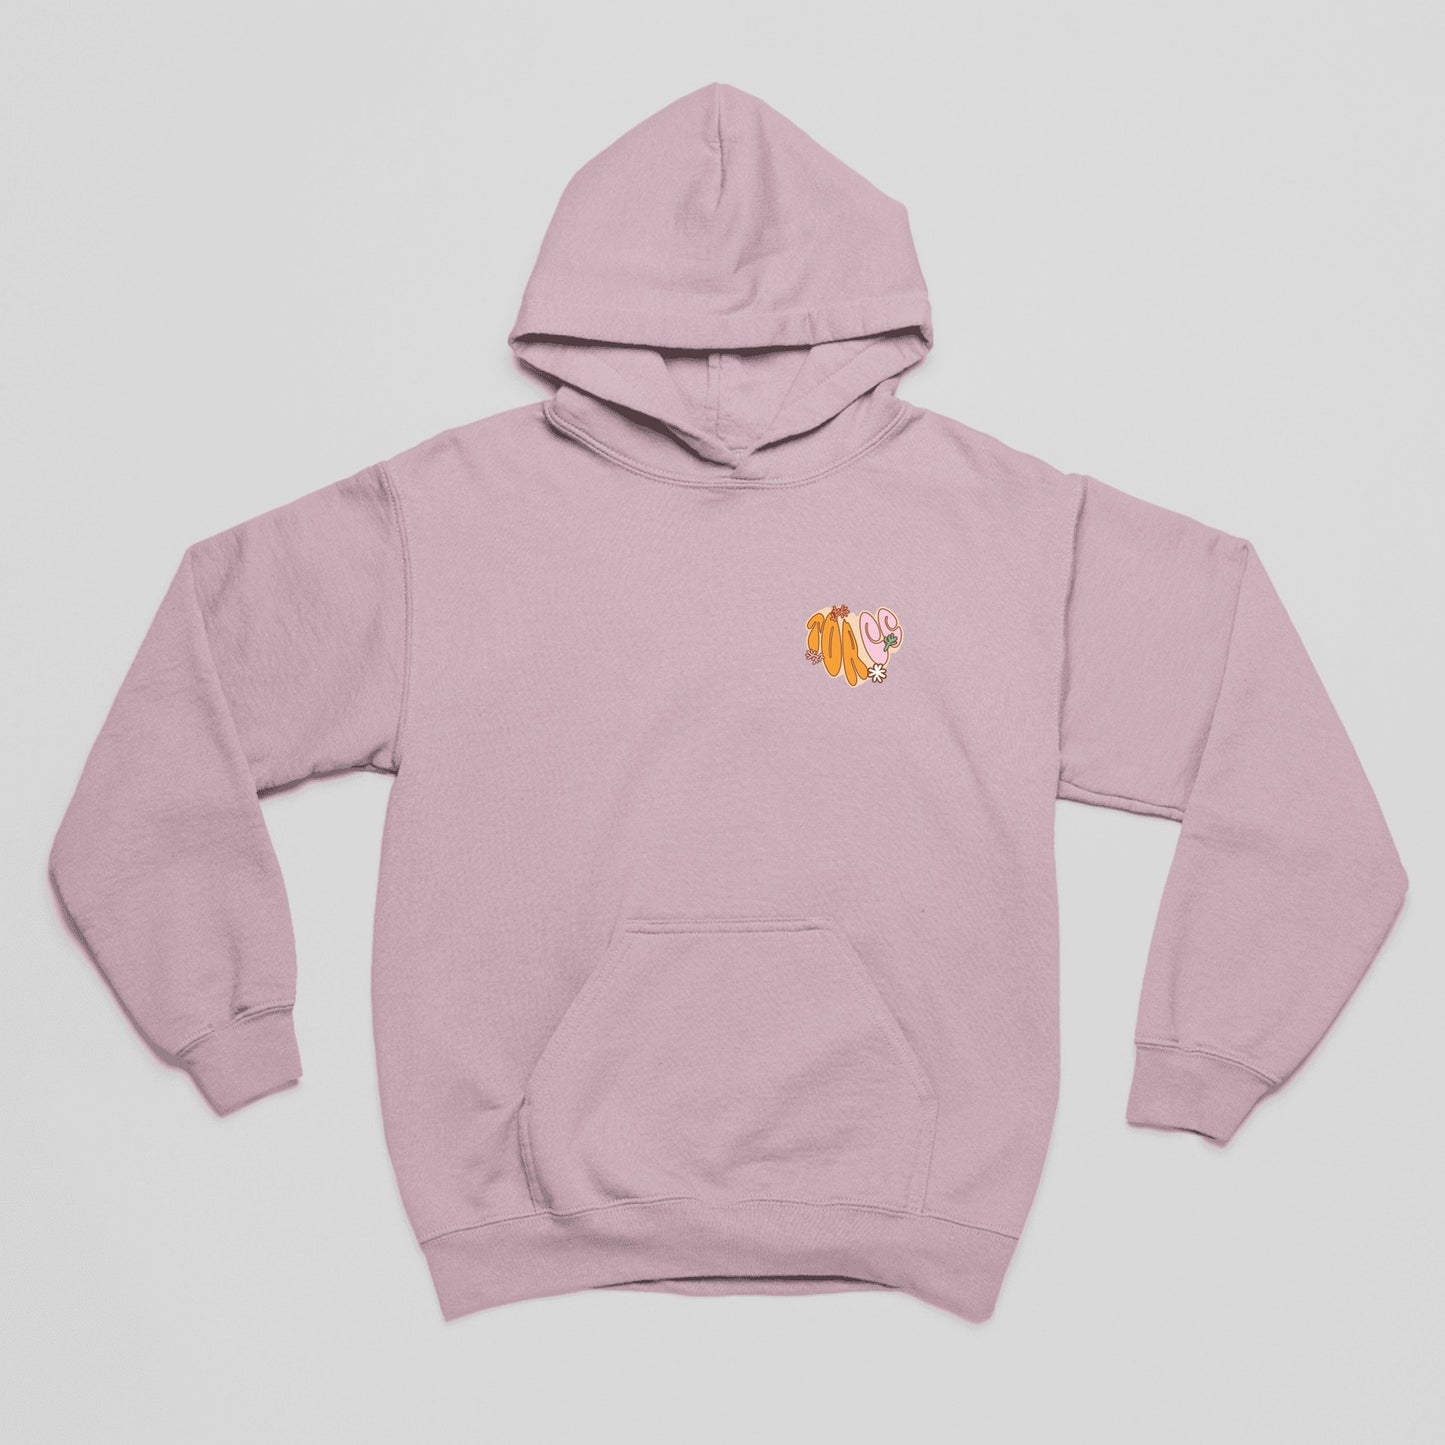 Baby Pink Follow Your Heart: Graphic Hoodie For Men and Womenoversized tshirt for men, oversized tshirt for women, graphic oversized tshirt, streetwear oversized tshirt, oversized tshirt, oversized tee, hoodies for men, hoodies for women, hoodies on sale, hoodies on sale india, hoodies men